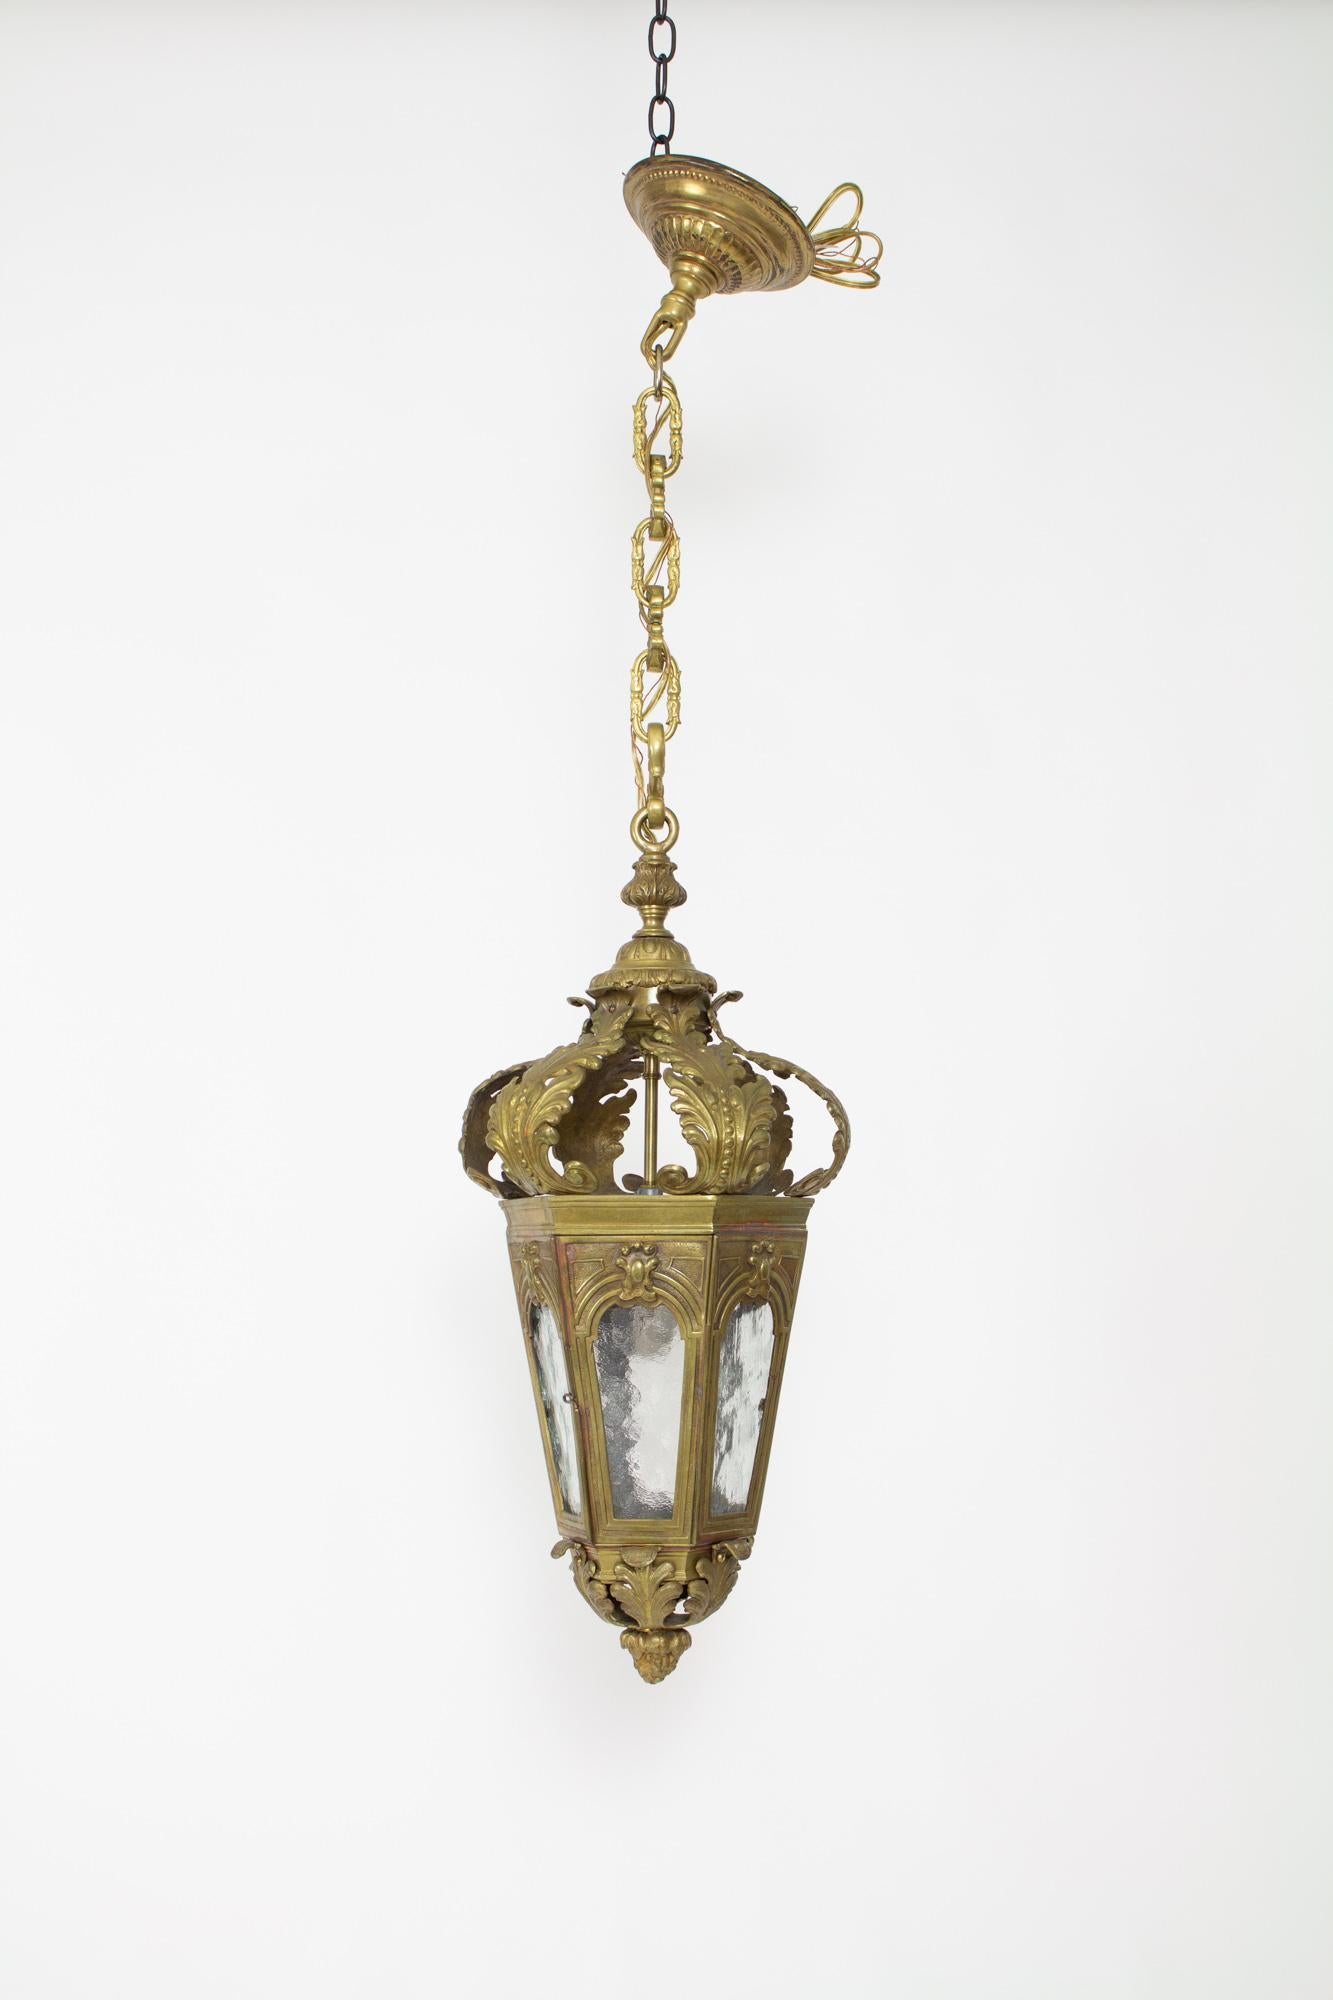 An ornate cast bronze lantern with acanthus leaf metalwork forming the top and bottom. There are six panes of textured glass. One of the six sides has a latching door for access to the single light bulb. This piece has been completely restored and